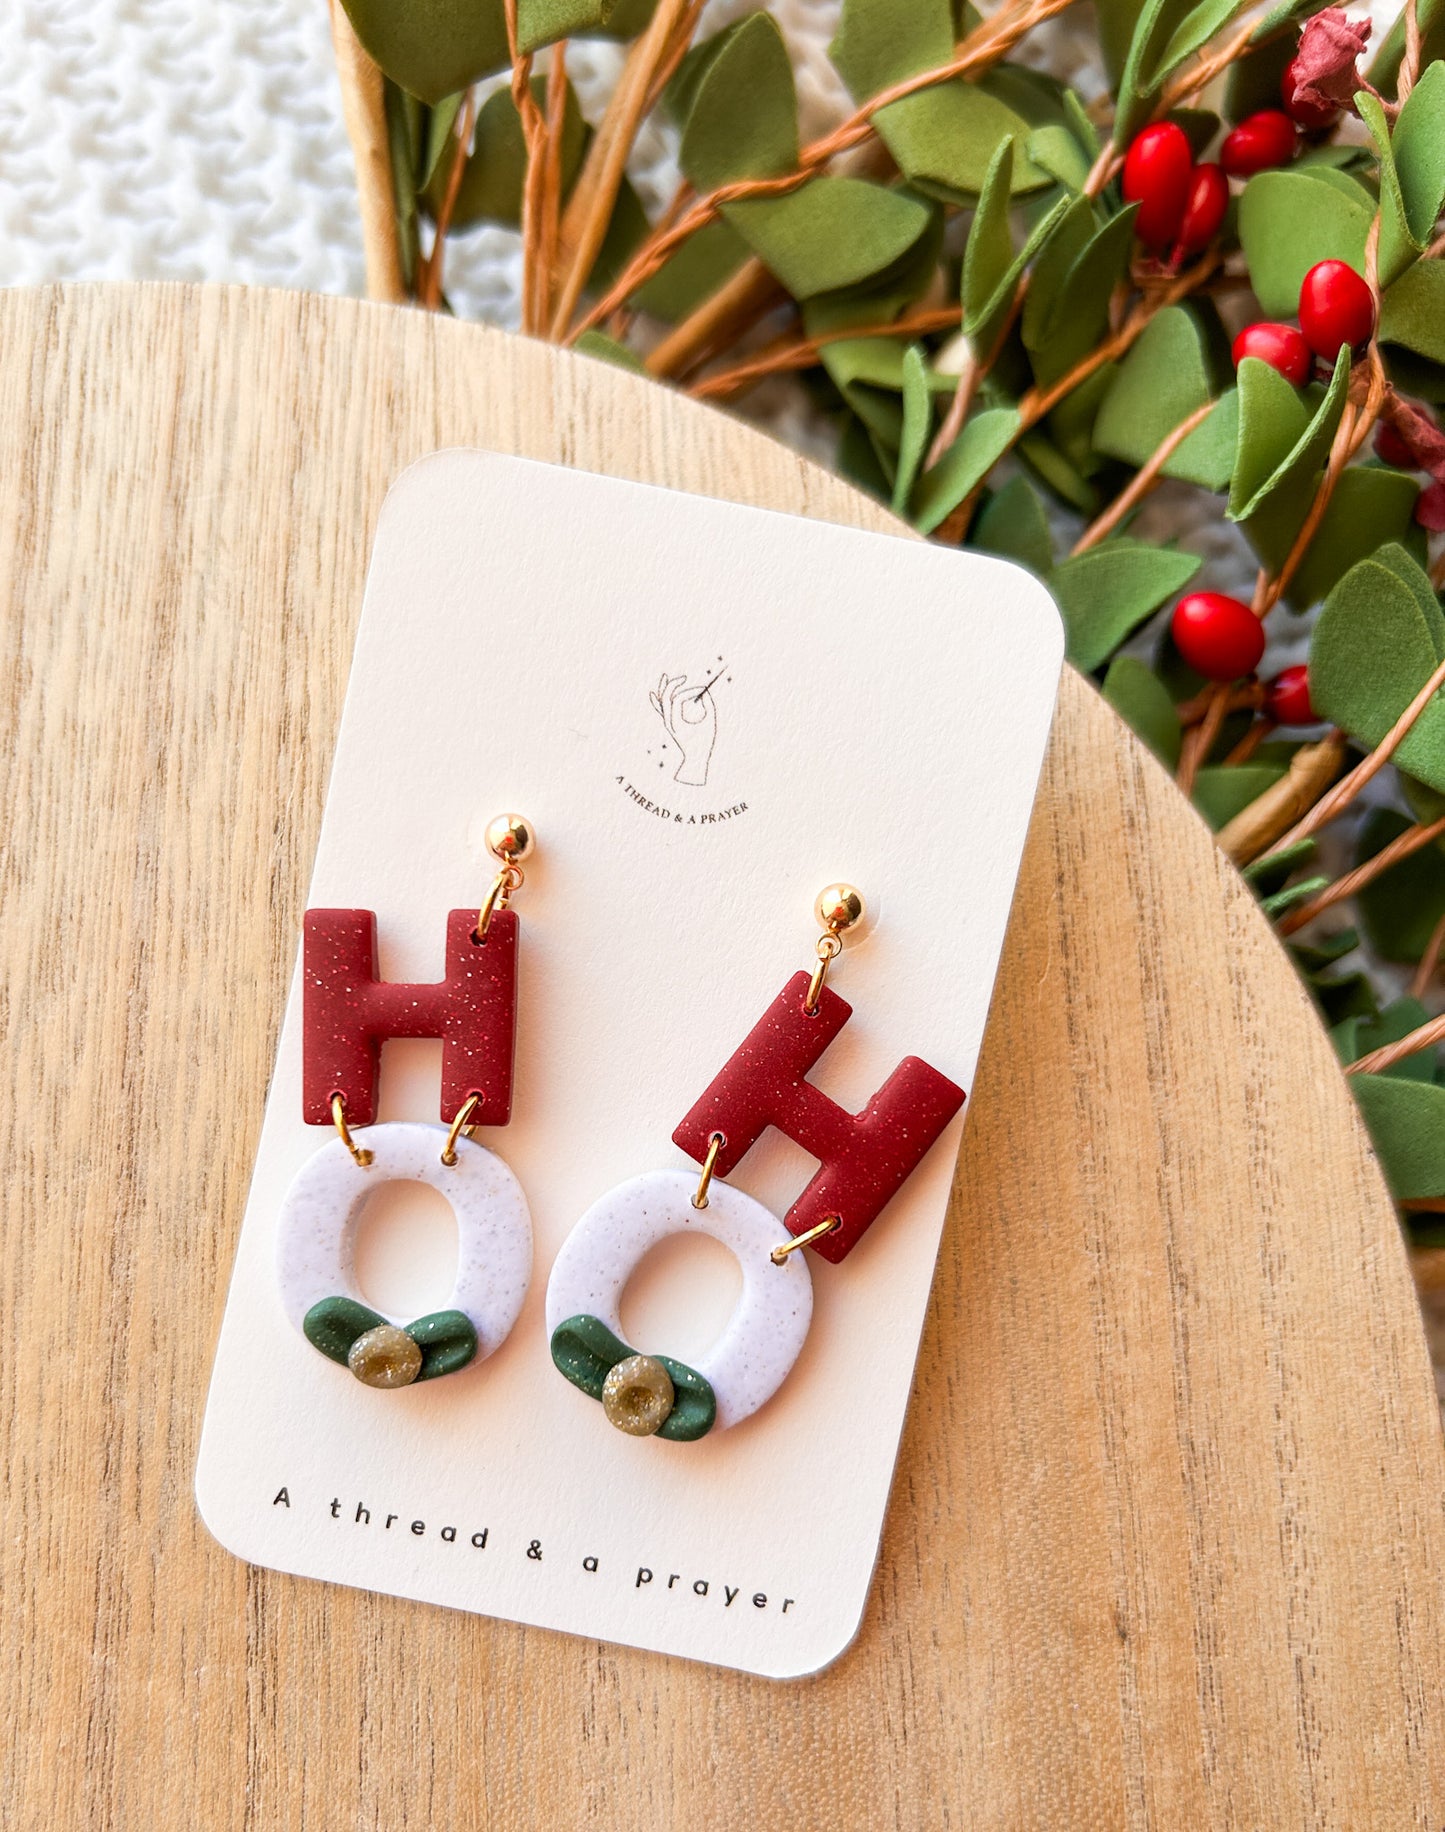 Most Wonderful Time of the Year Holiday Earrings | HO HO HO, Christmas Lights, Candy Cane Inspired | Christmas Earrings | Gift Earrings | Holiday Colors | Lightweight